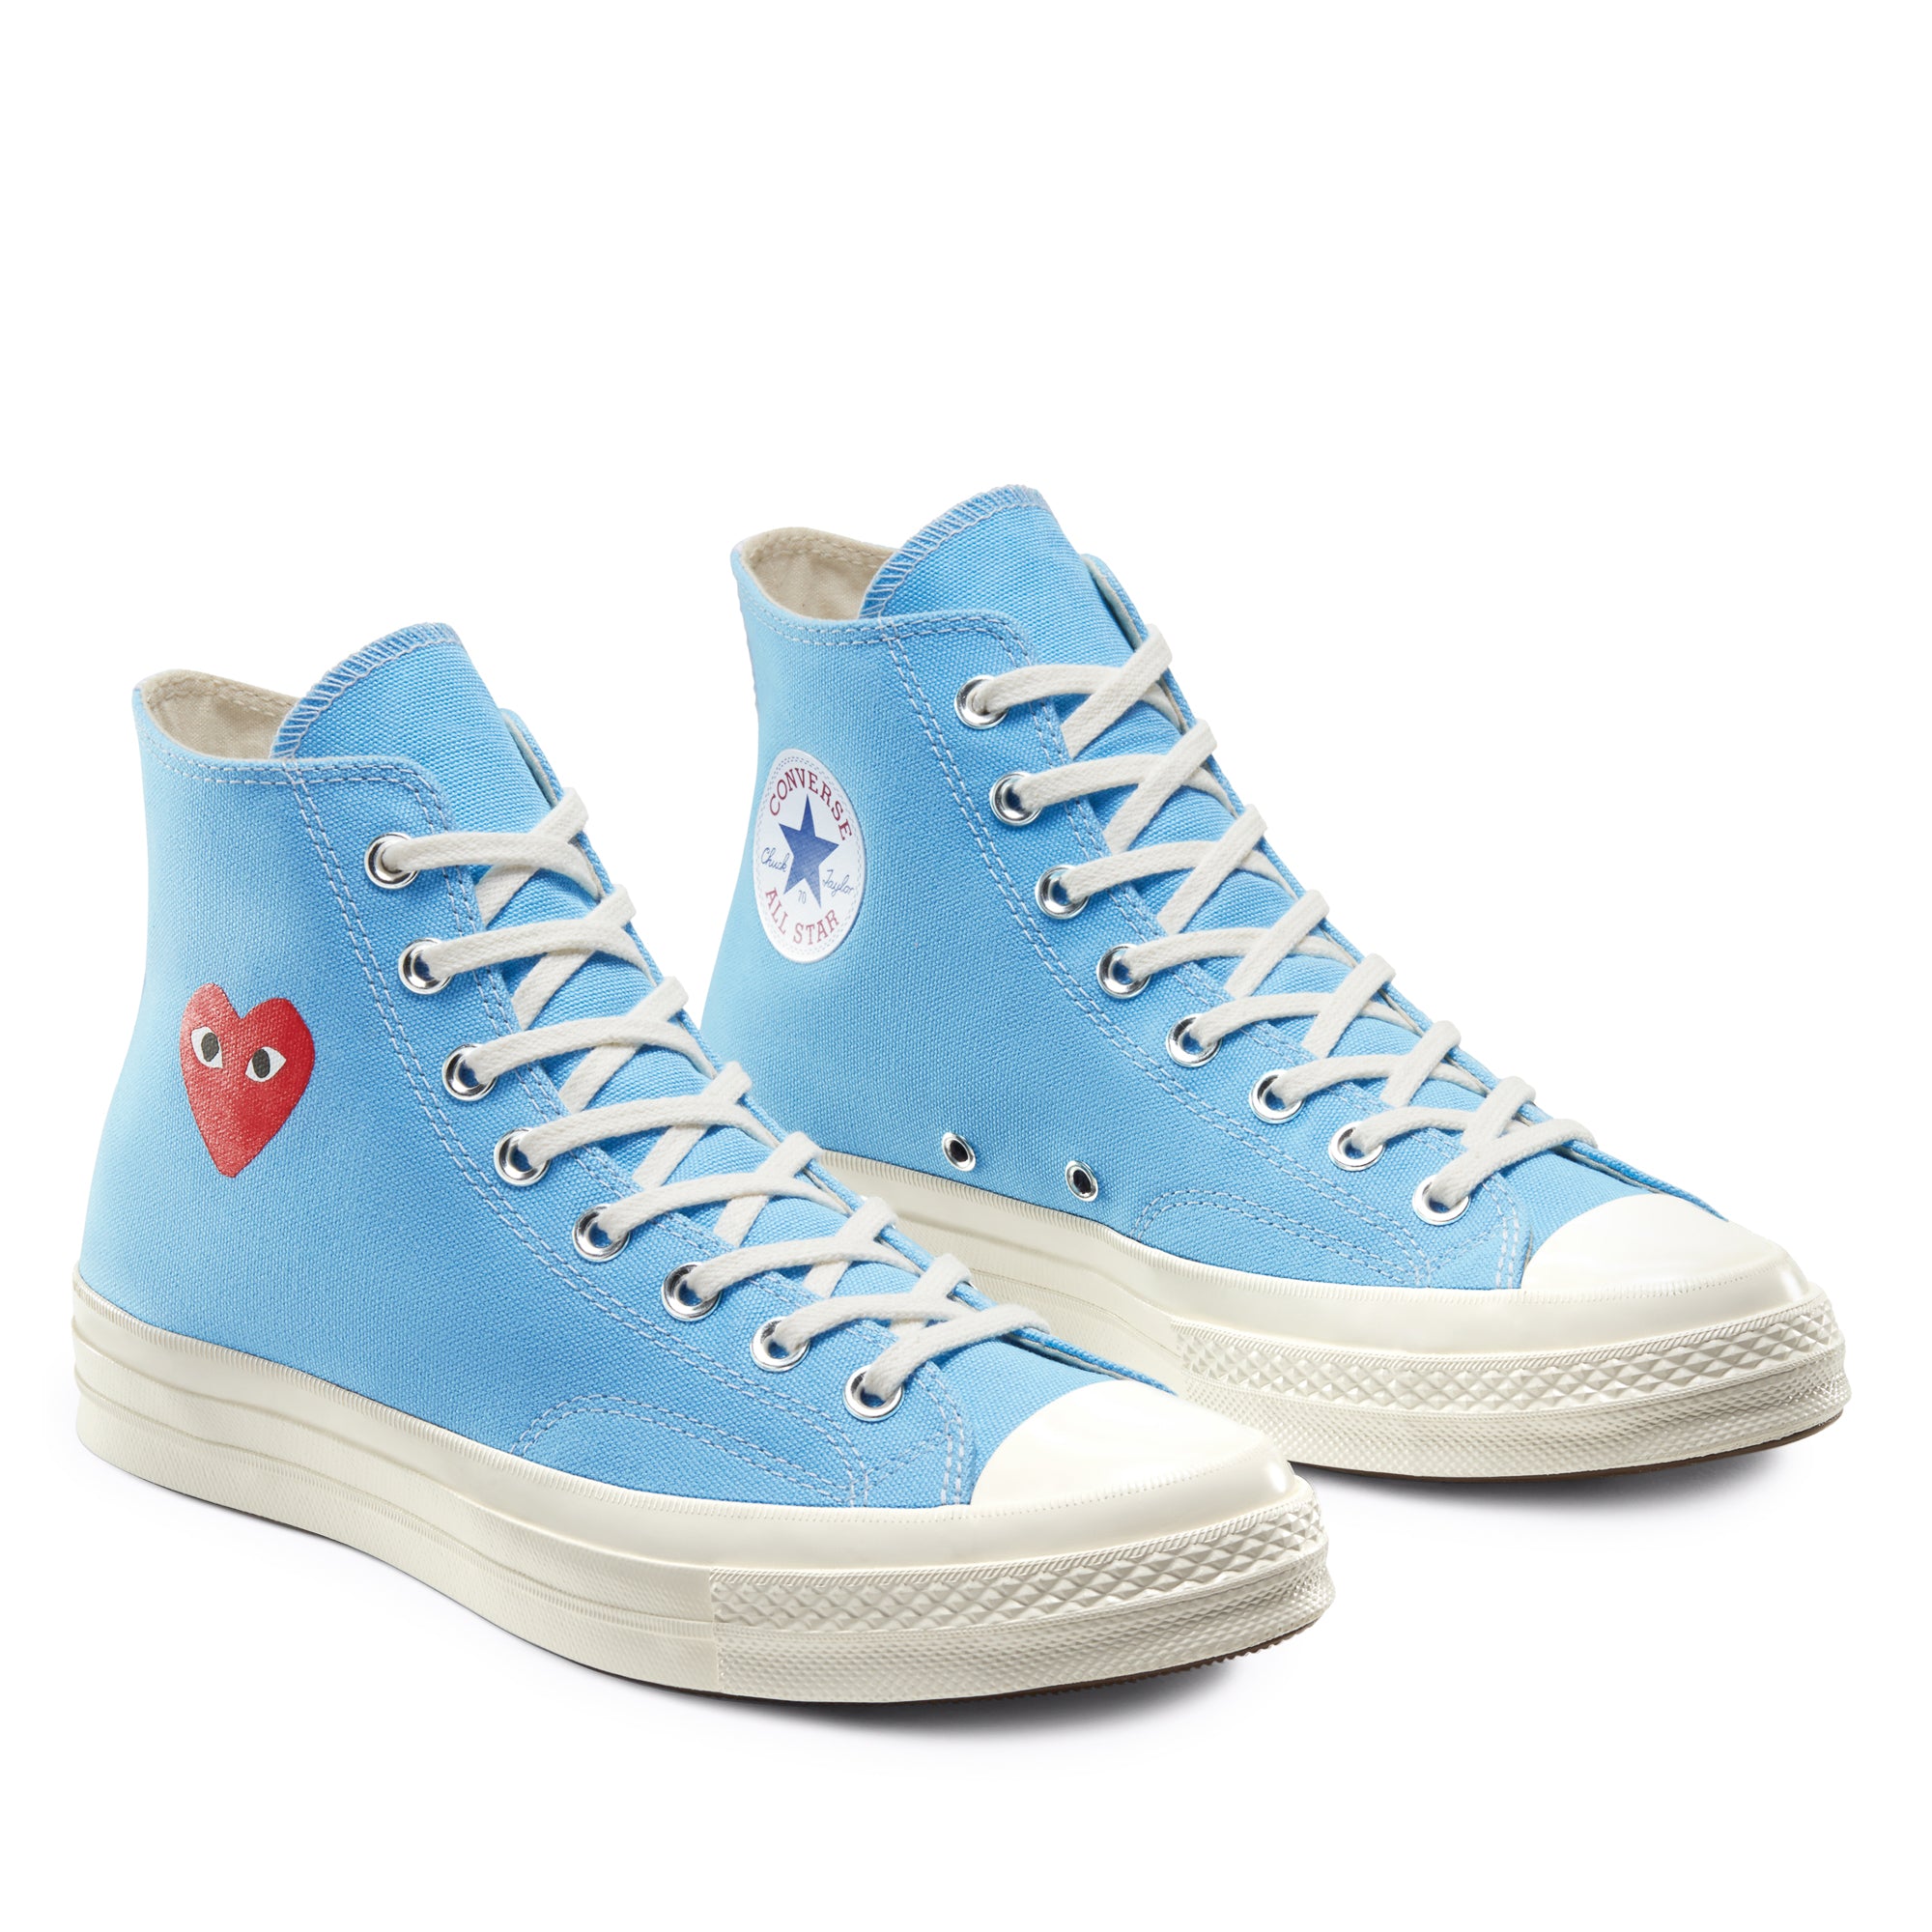 Play Converse - Red Heart Chuck ’70 High Sneakers - (Bright Blue) view 3